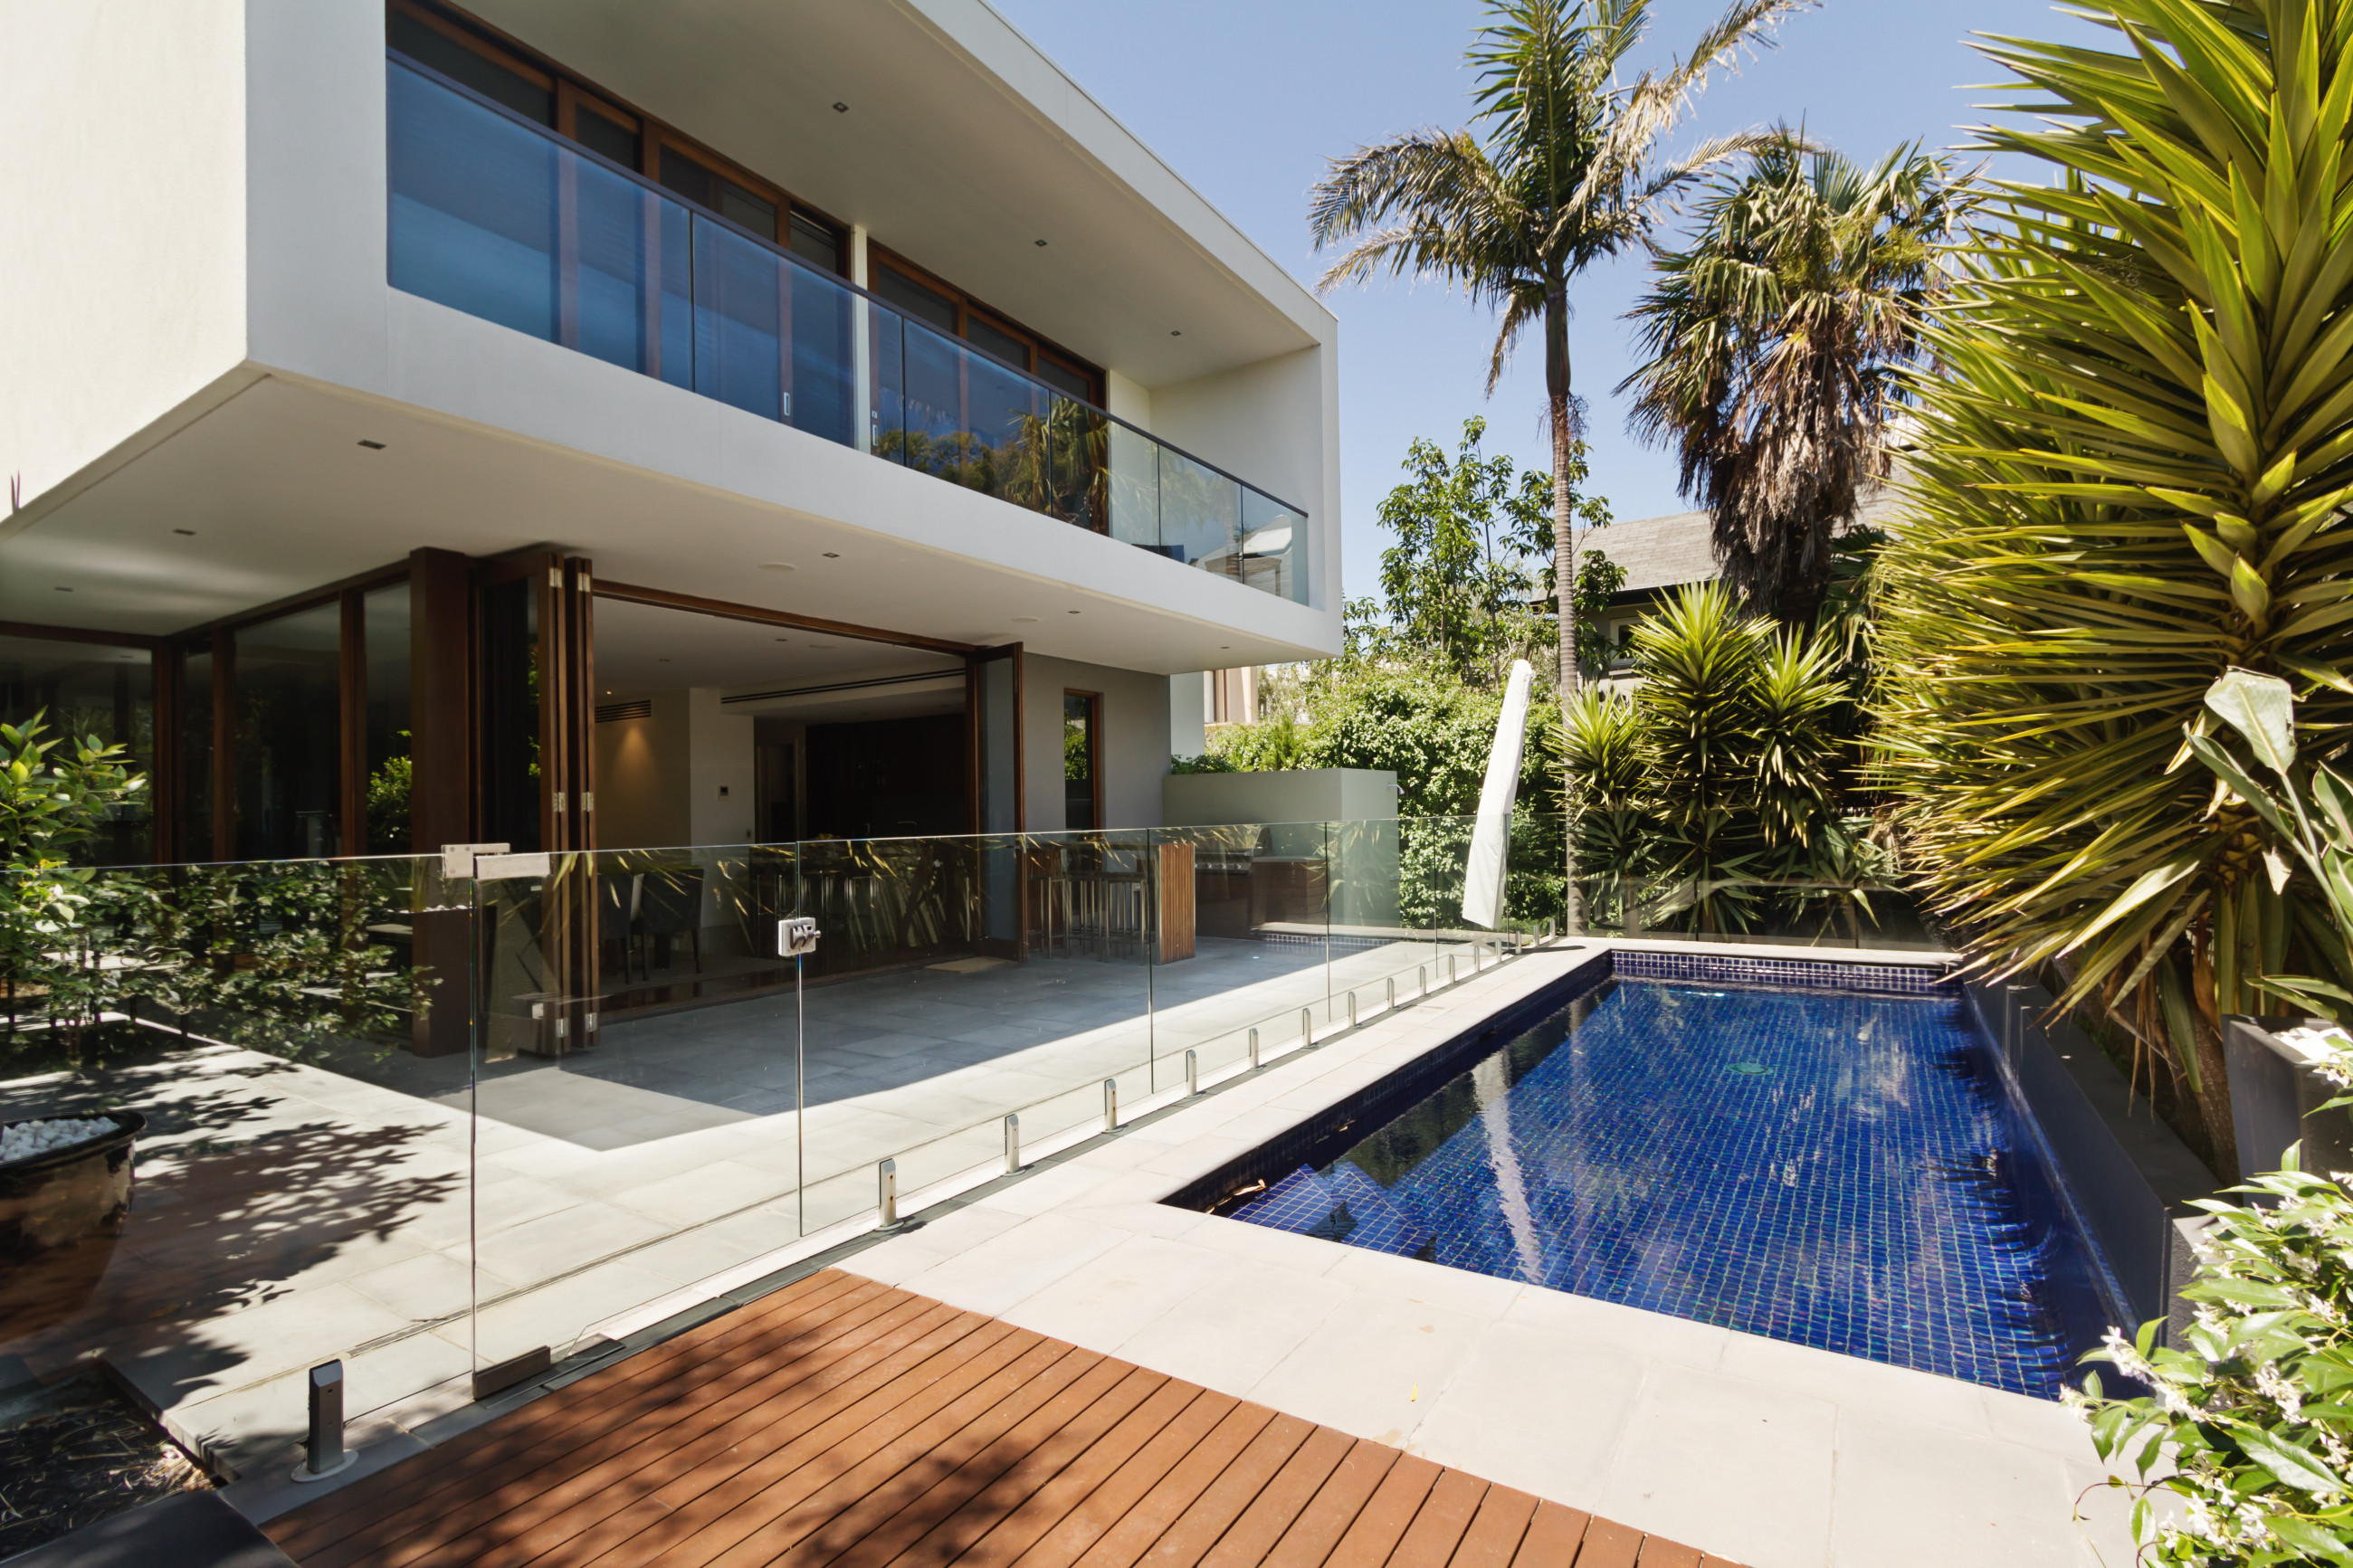 A stylish home with a pool and wooden decking with a frameless glass fence